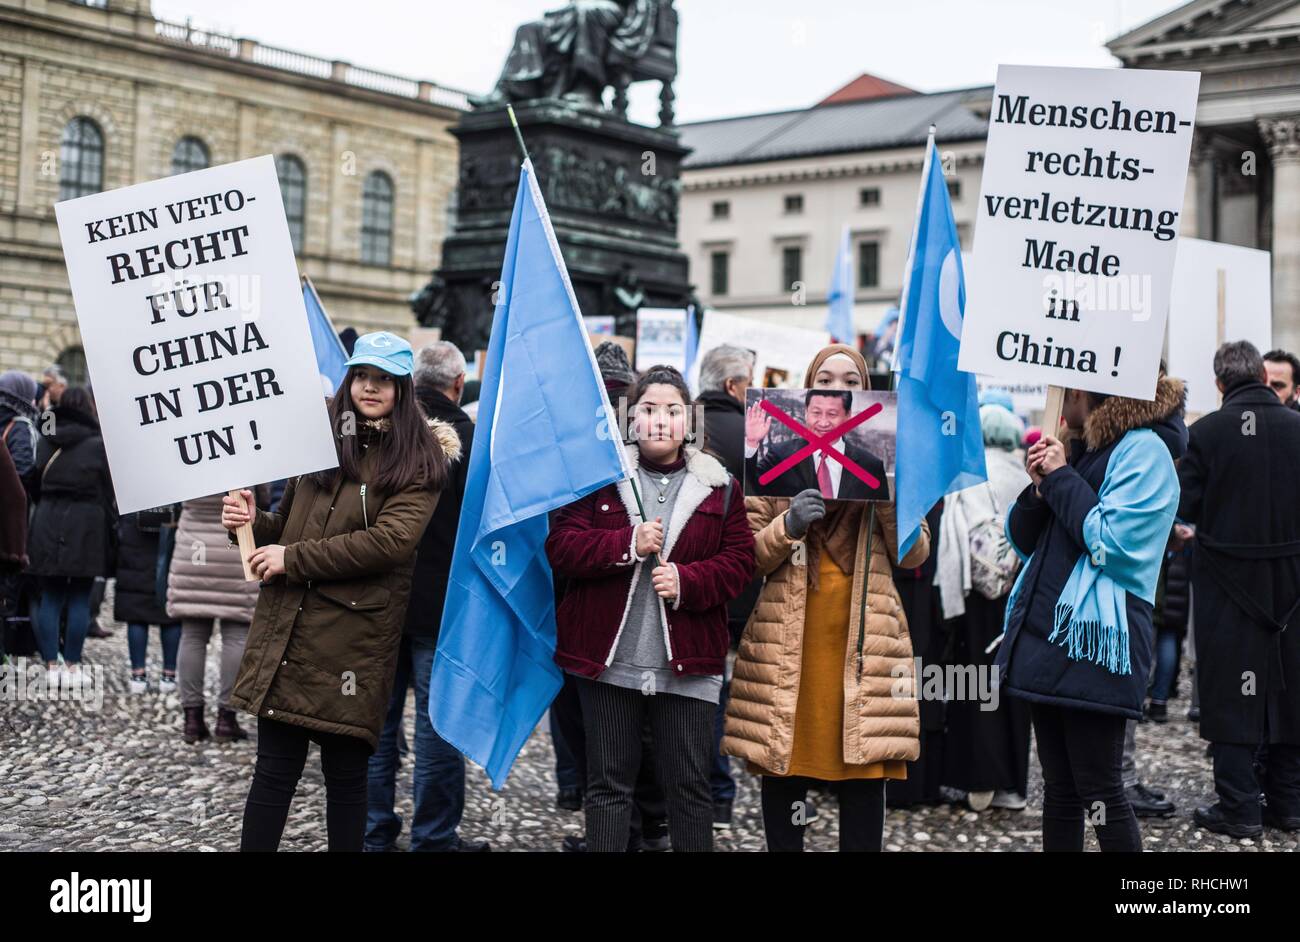 Munich, Bavaria, Germany. 2nd Feb, 2019. Over 400 primarily Turkish demonstrators assembled at Munich's Max Joseph Platz to protest against the so-called 'Muslim Crackdown' by the Chinese Communist Party in the Xinjiang Autonomous Region of China. The region is contains roughly 26 million people, 11 million of whom are the ethnically Turkic Uyghurs who still call the region East Turkistan. The CCP has placed upwards of 1 million Uyghurs in reeducation camps, as well as performing widespread surveillance of the non-Han residents. Credit: Sachelle Babbar/ZUMA Wire/Alamy Live News Credit: ZUMA P Stock Photo